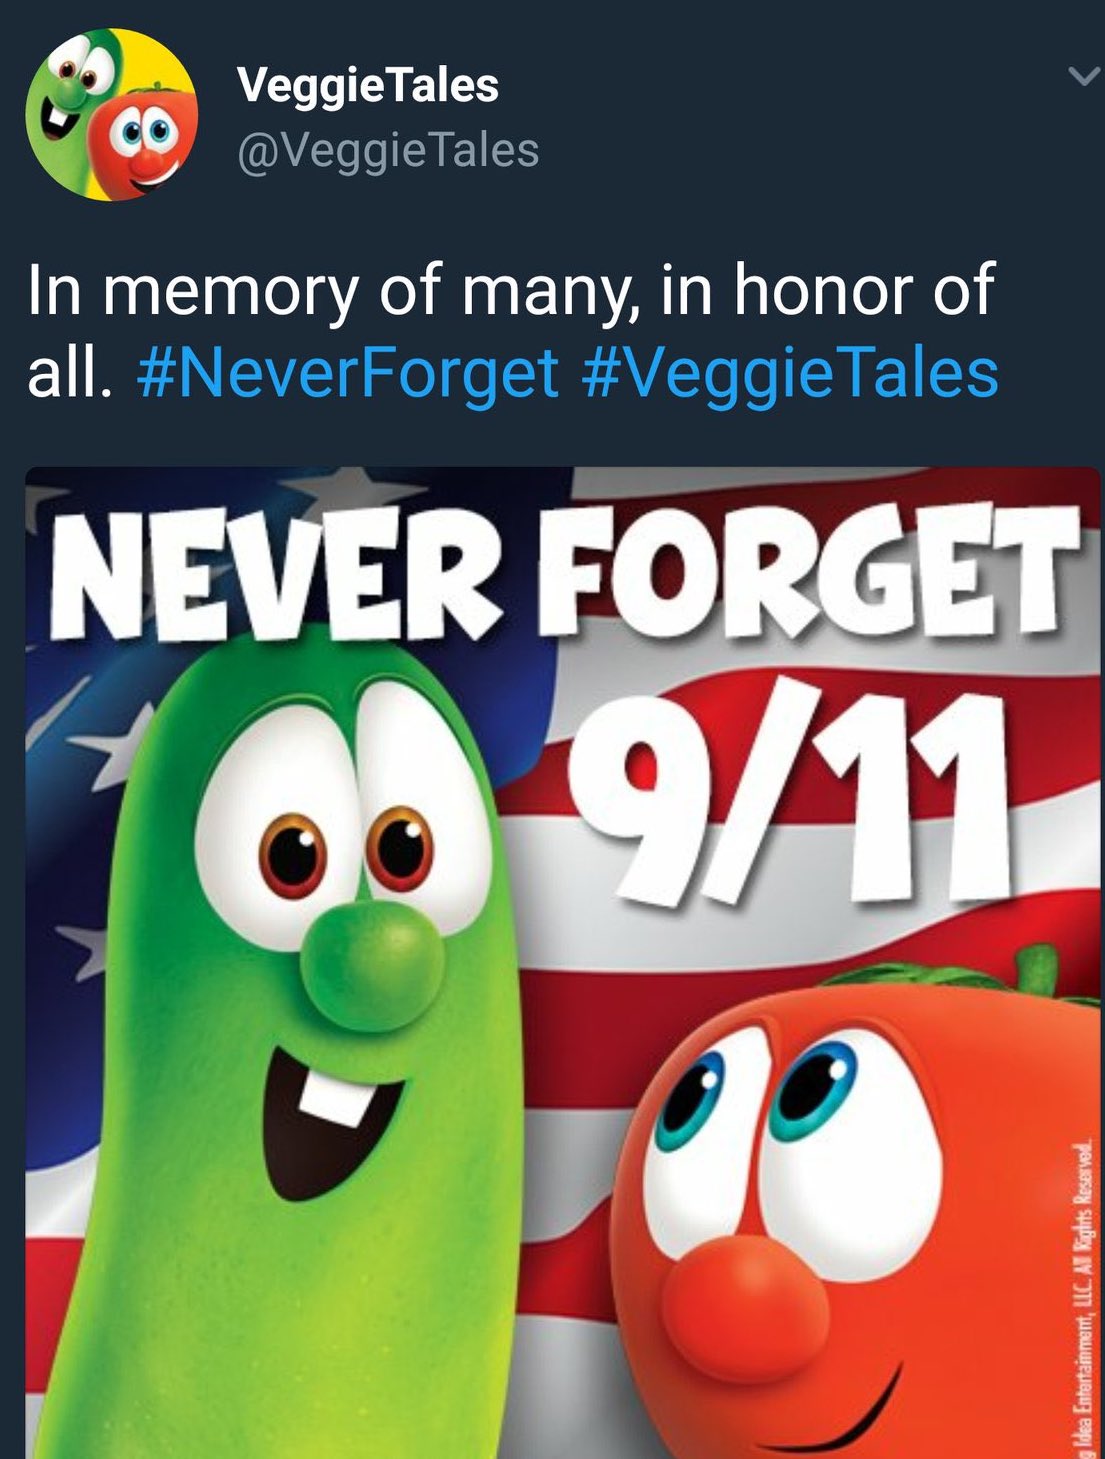 Best Tweets of All Time - comedyheaven reddit - Veggie Tales Tales In memory of many, in honor of all. Forget Tales Never Forget 0911 Idea Entertainment, Llc. All Rights Reserved.